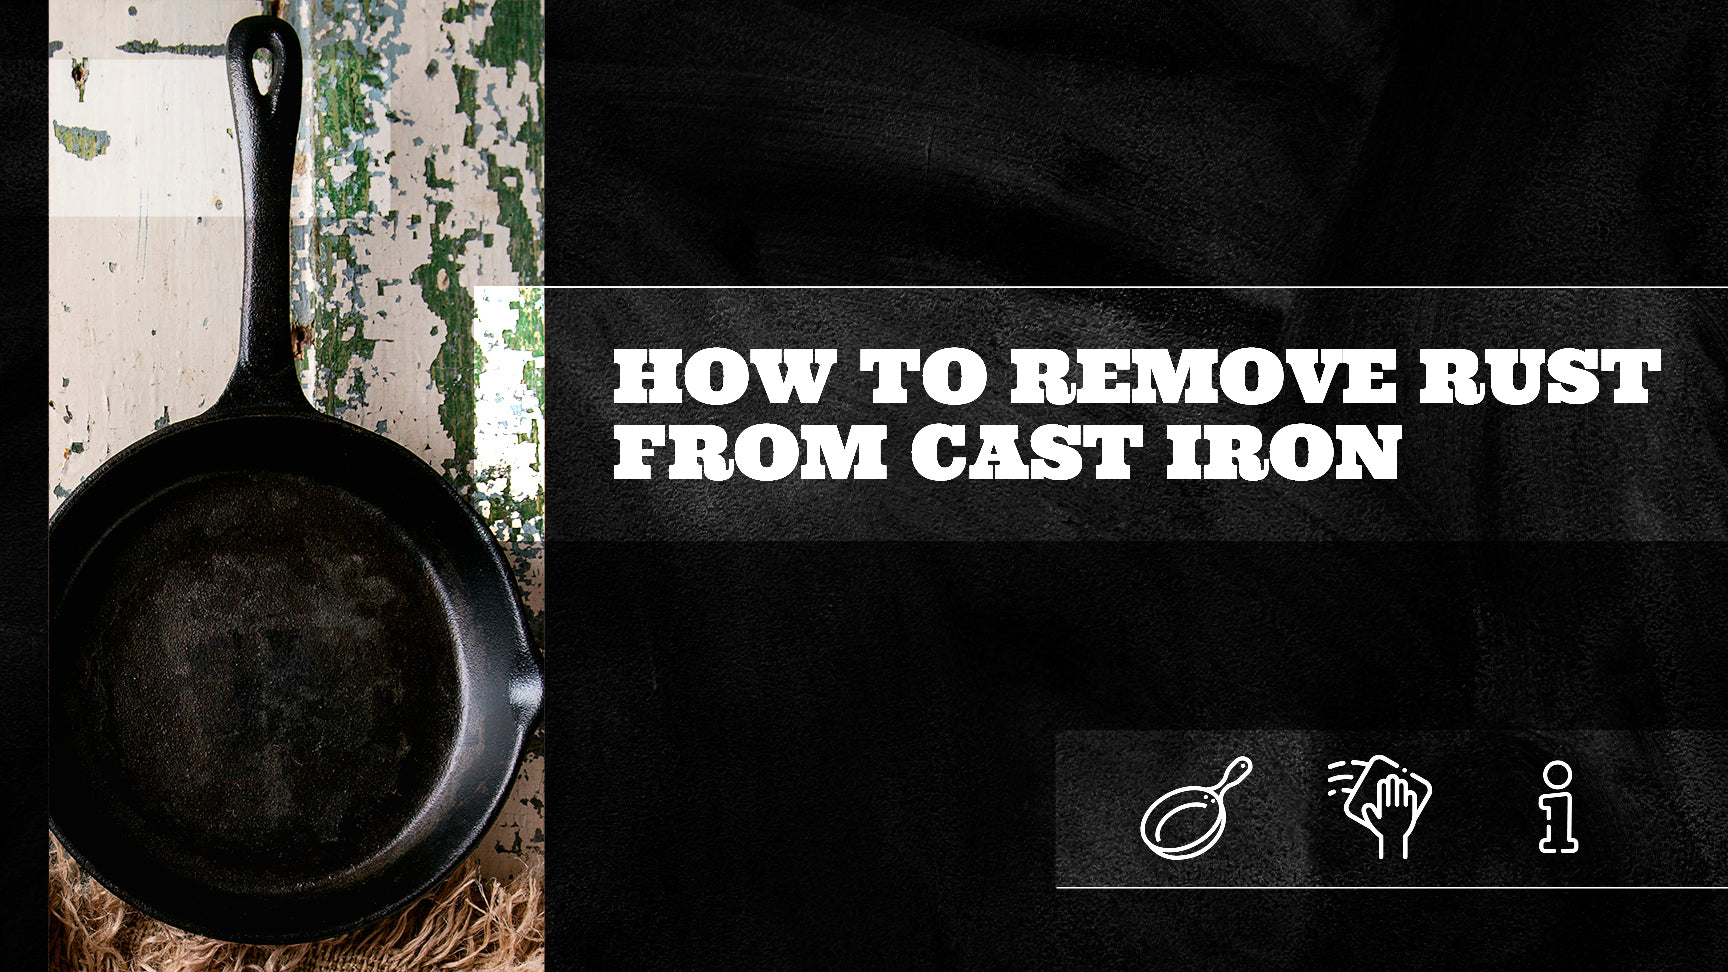 How to Restore a Rusty and Damaged Cast Iron Skillet to Its Former Glory